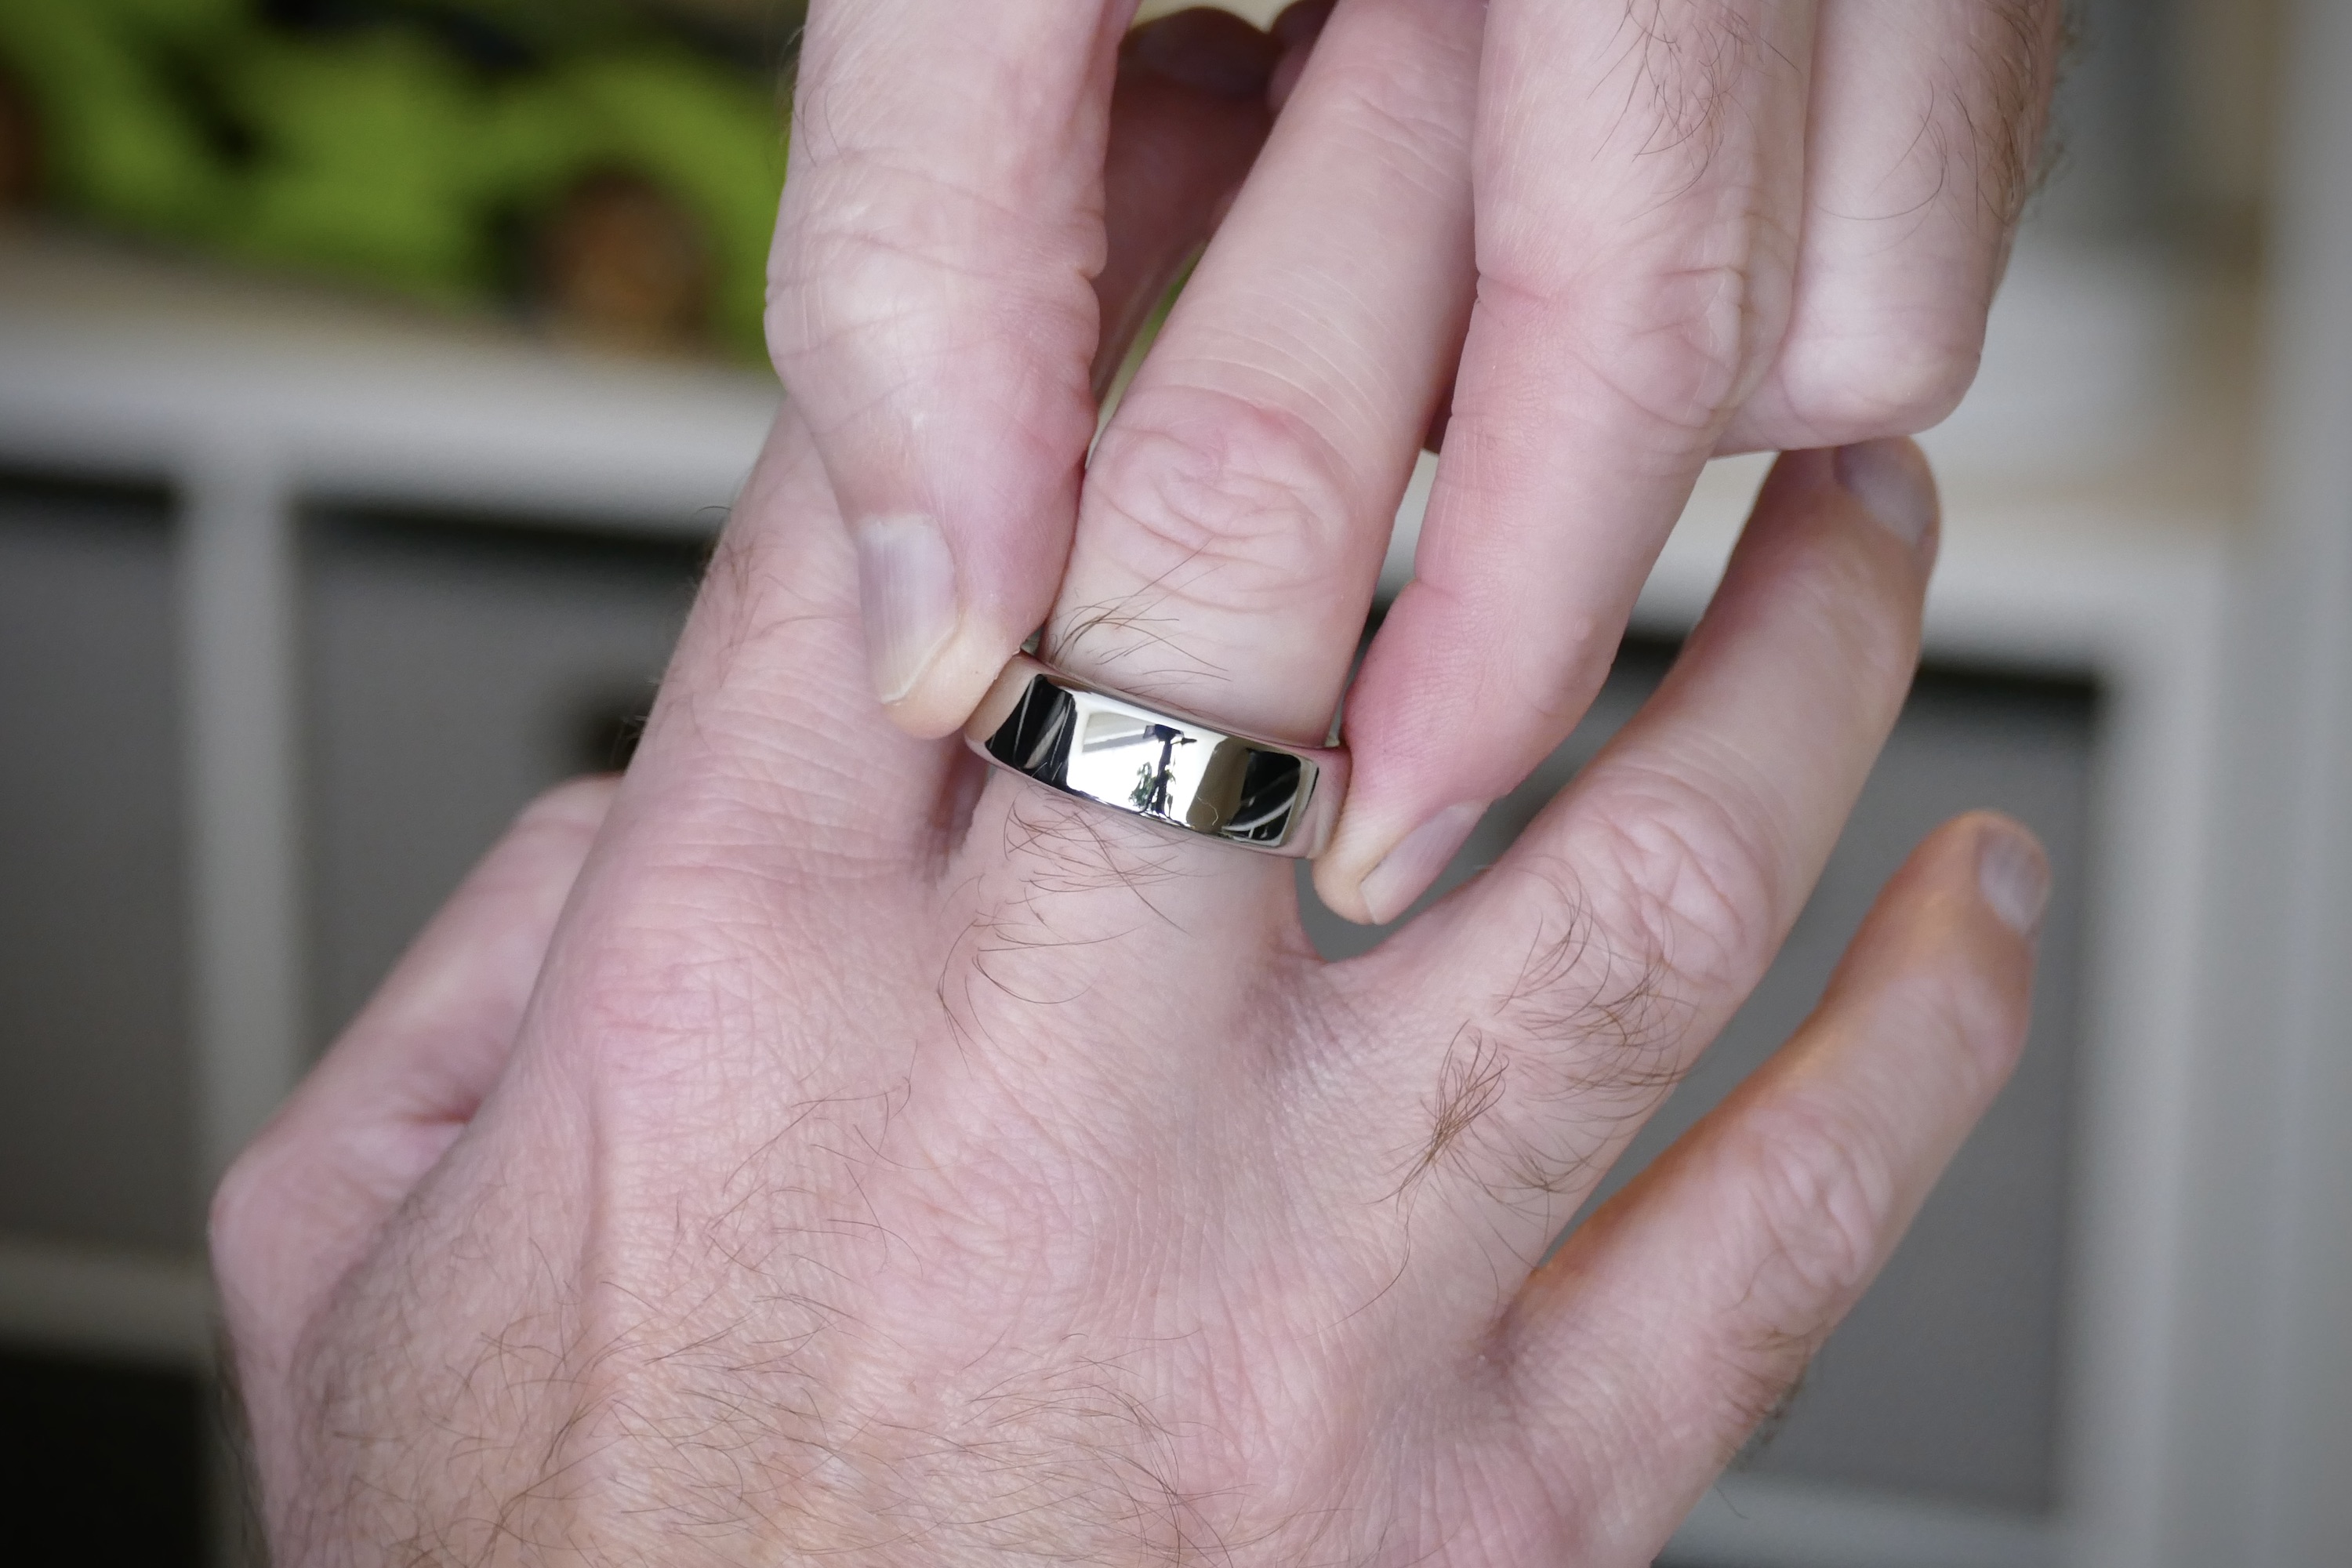 Putting the Oura Ring on a finger.